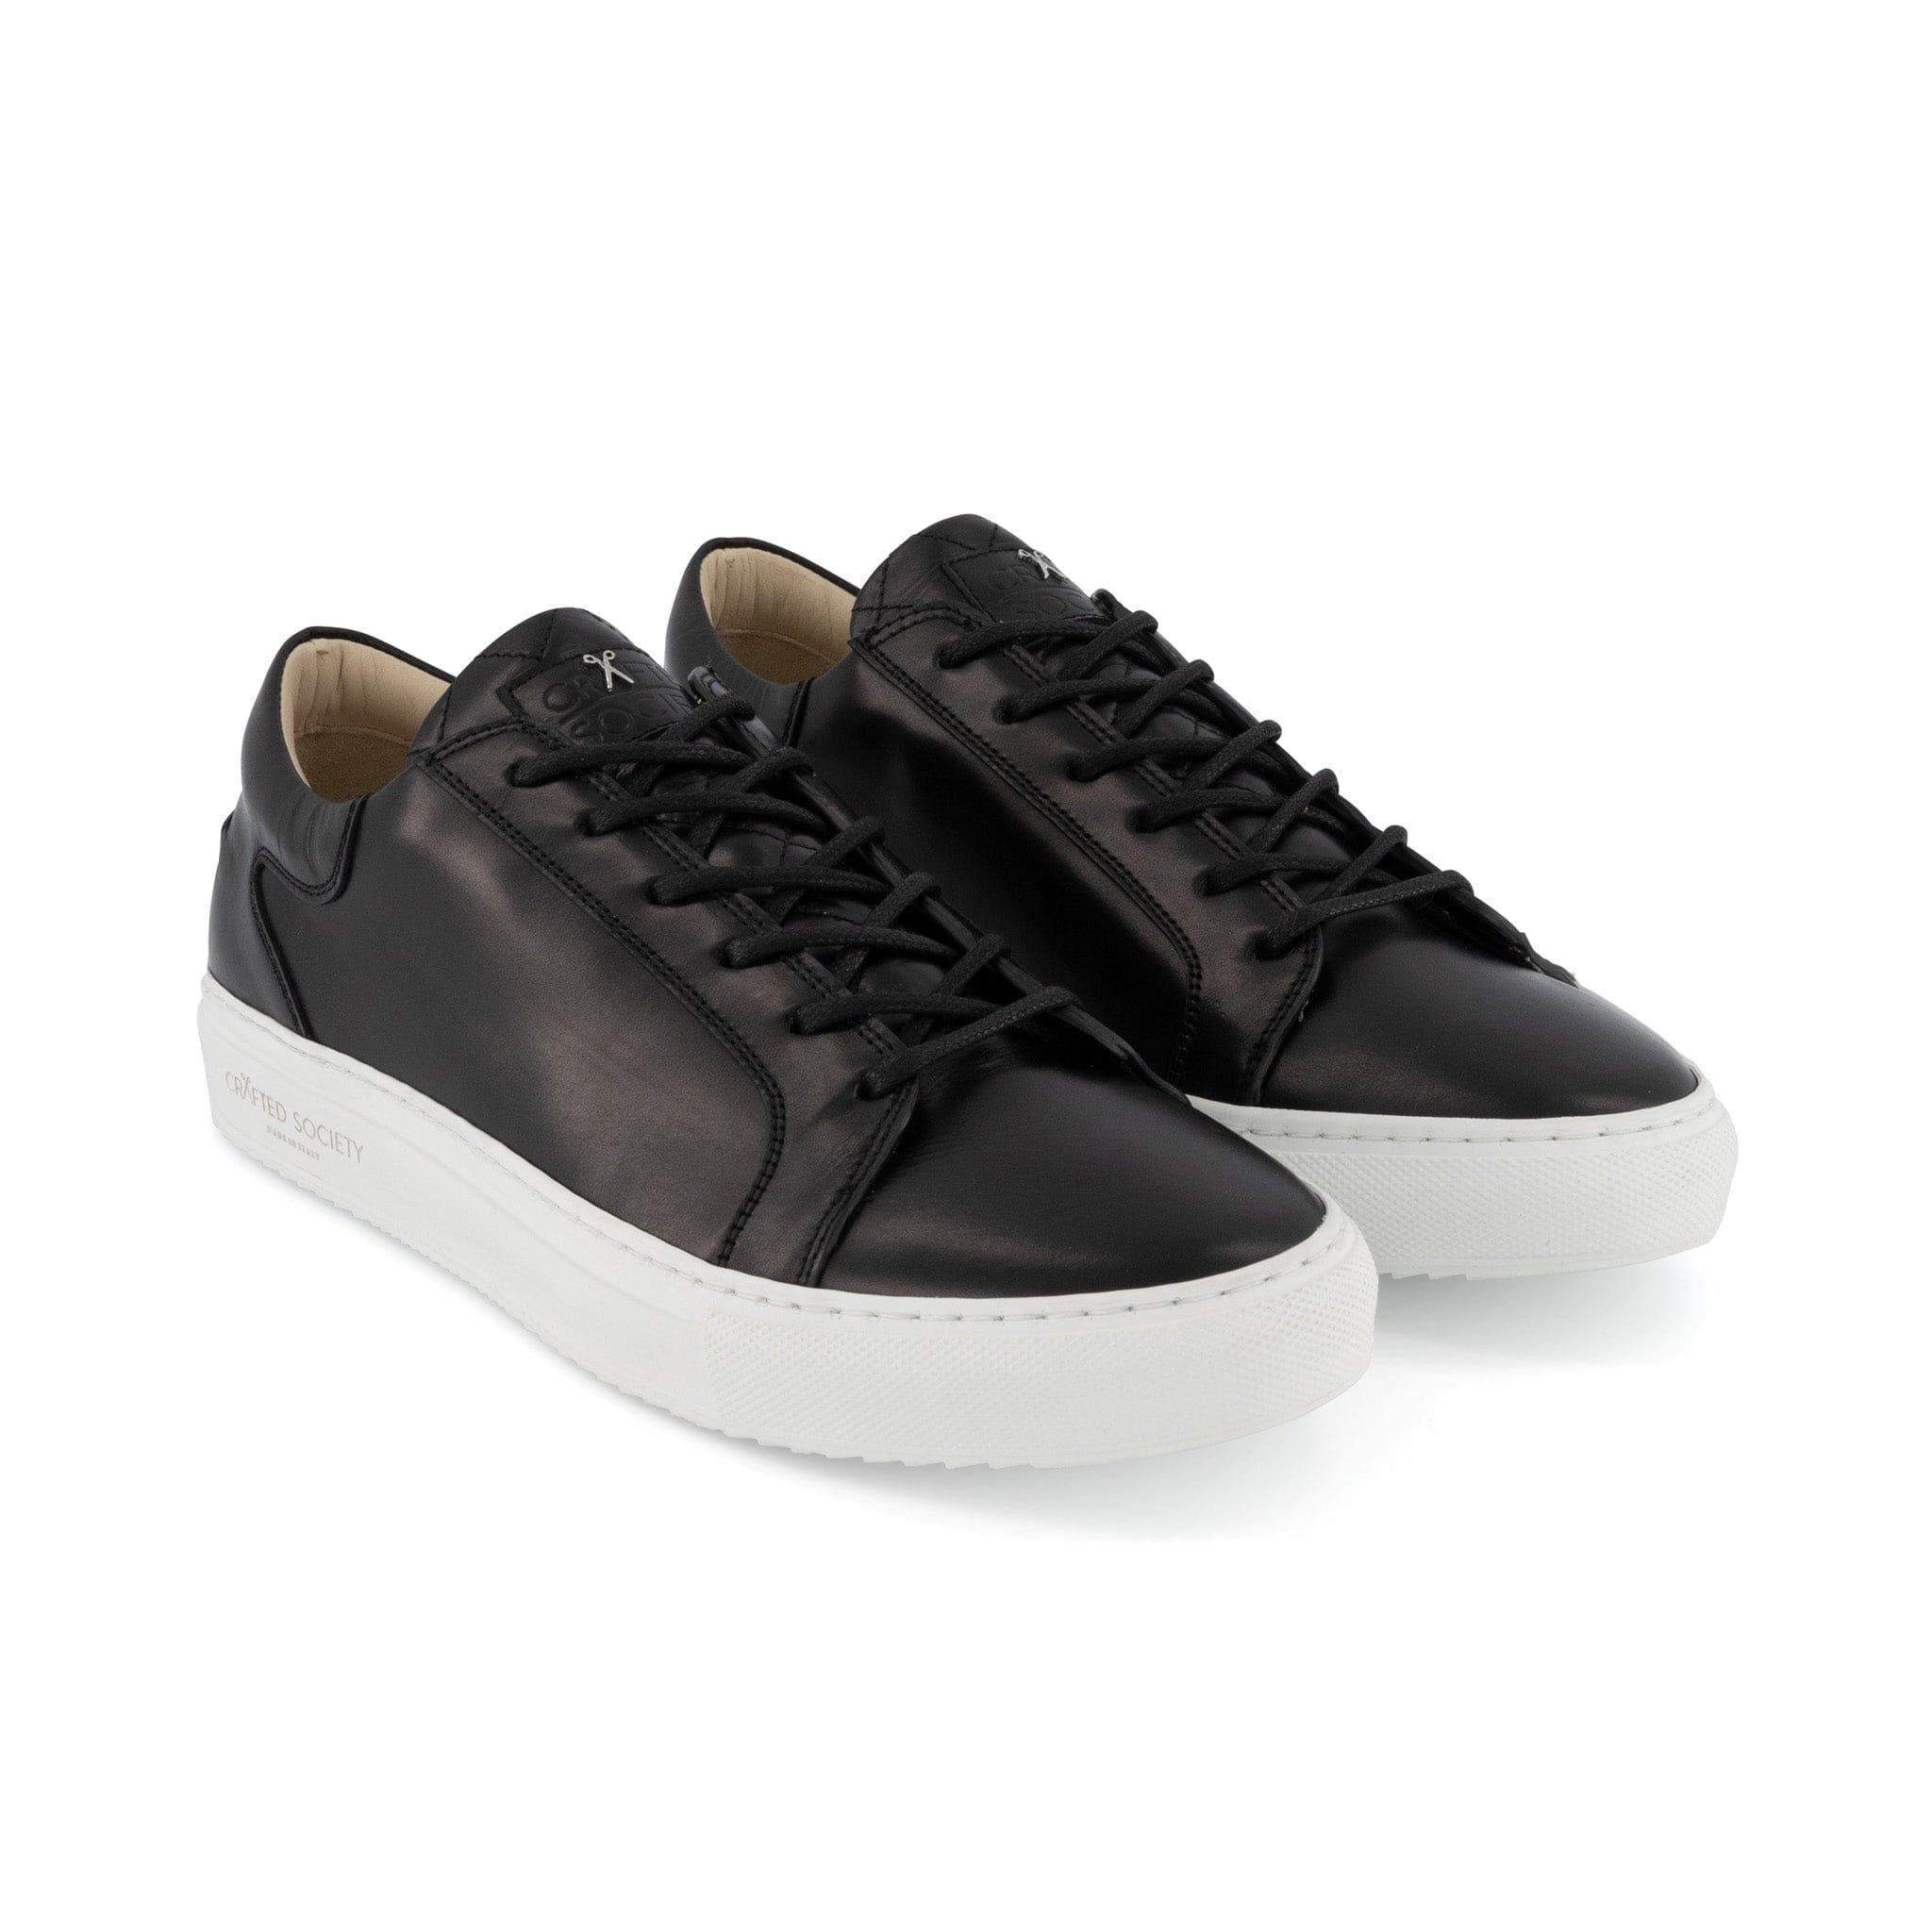 Mario Low Refined Sneaker | Black Full Grain Leather | White Outsole | Made in Italy